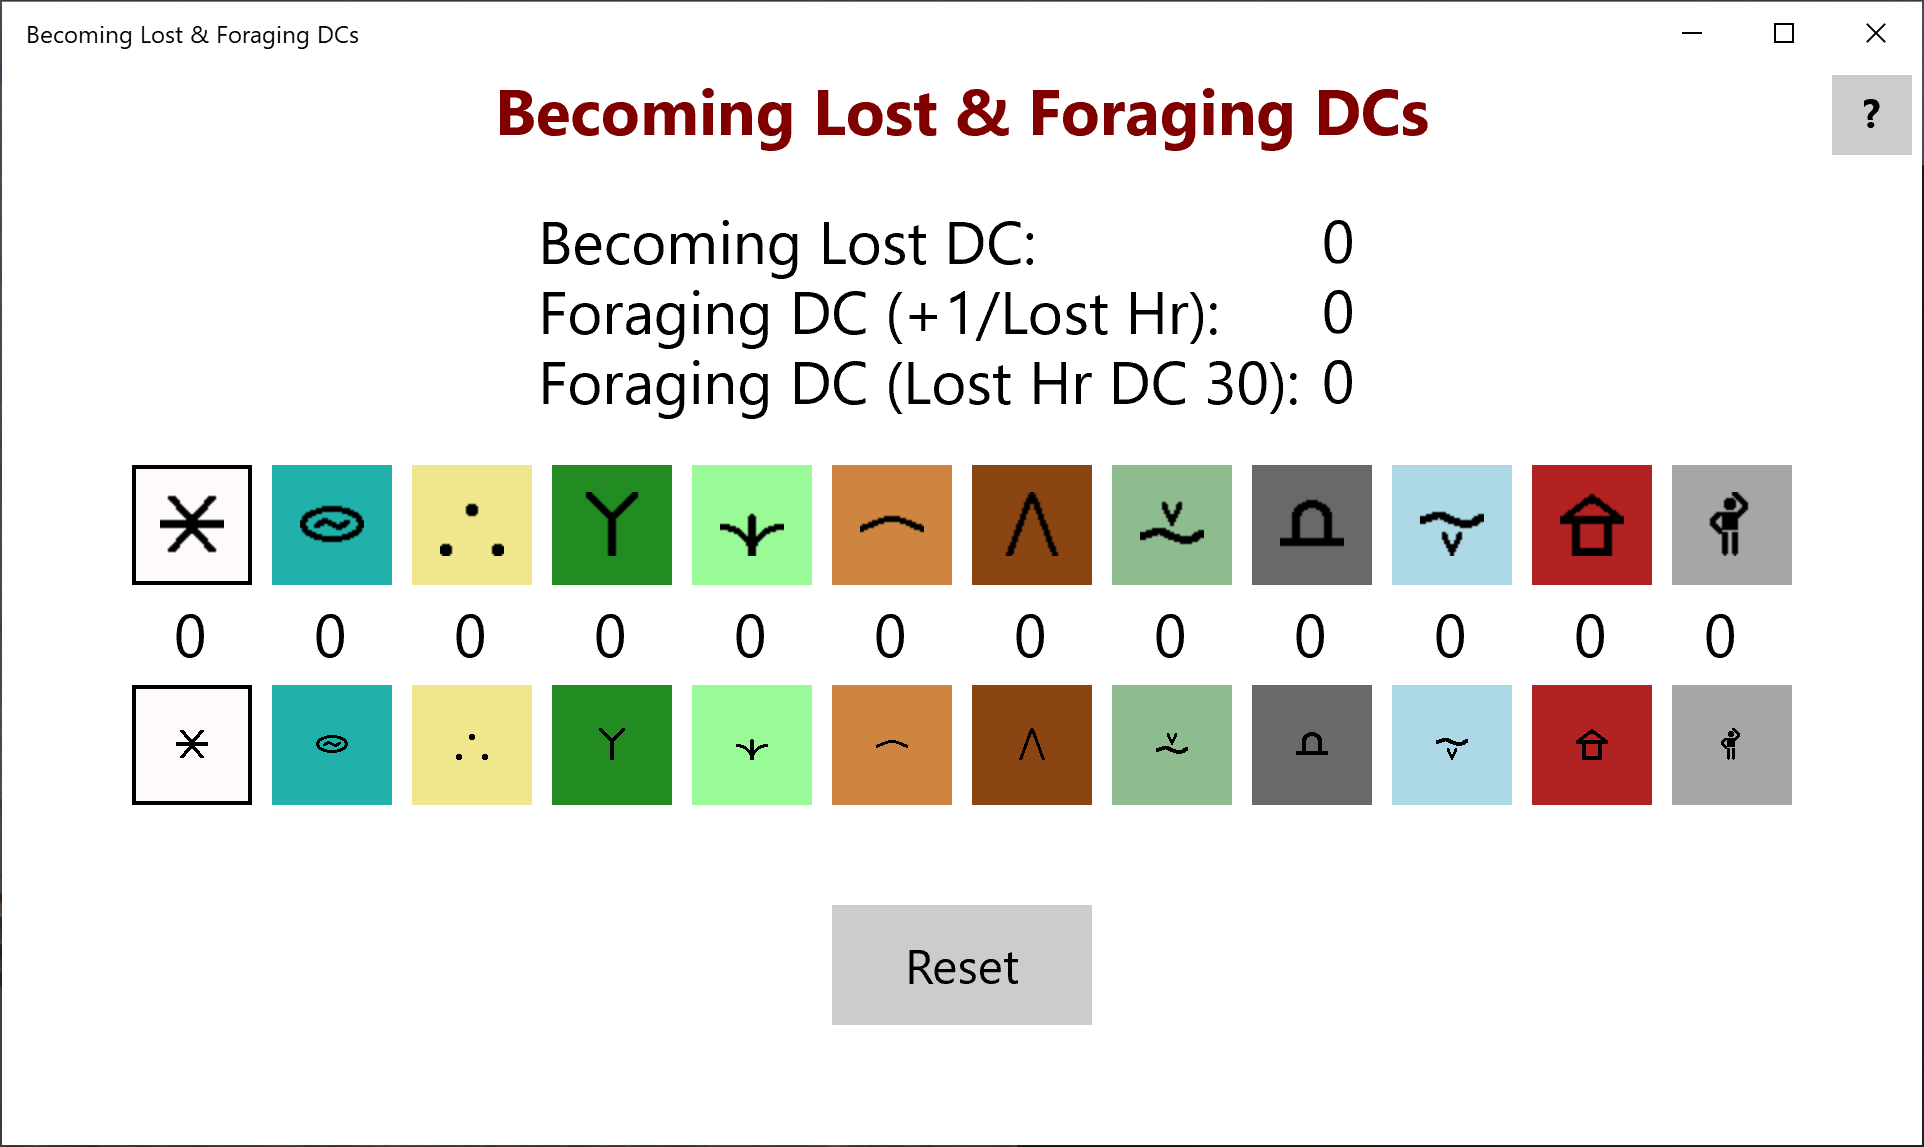 Becoming Lost & Foraging DCs